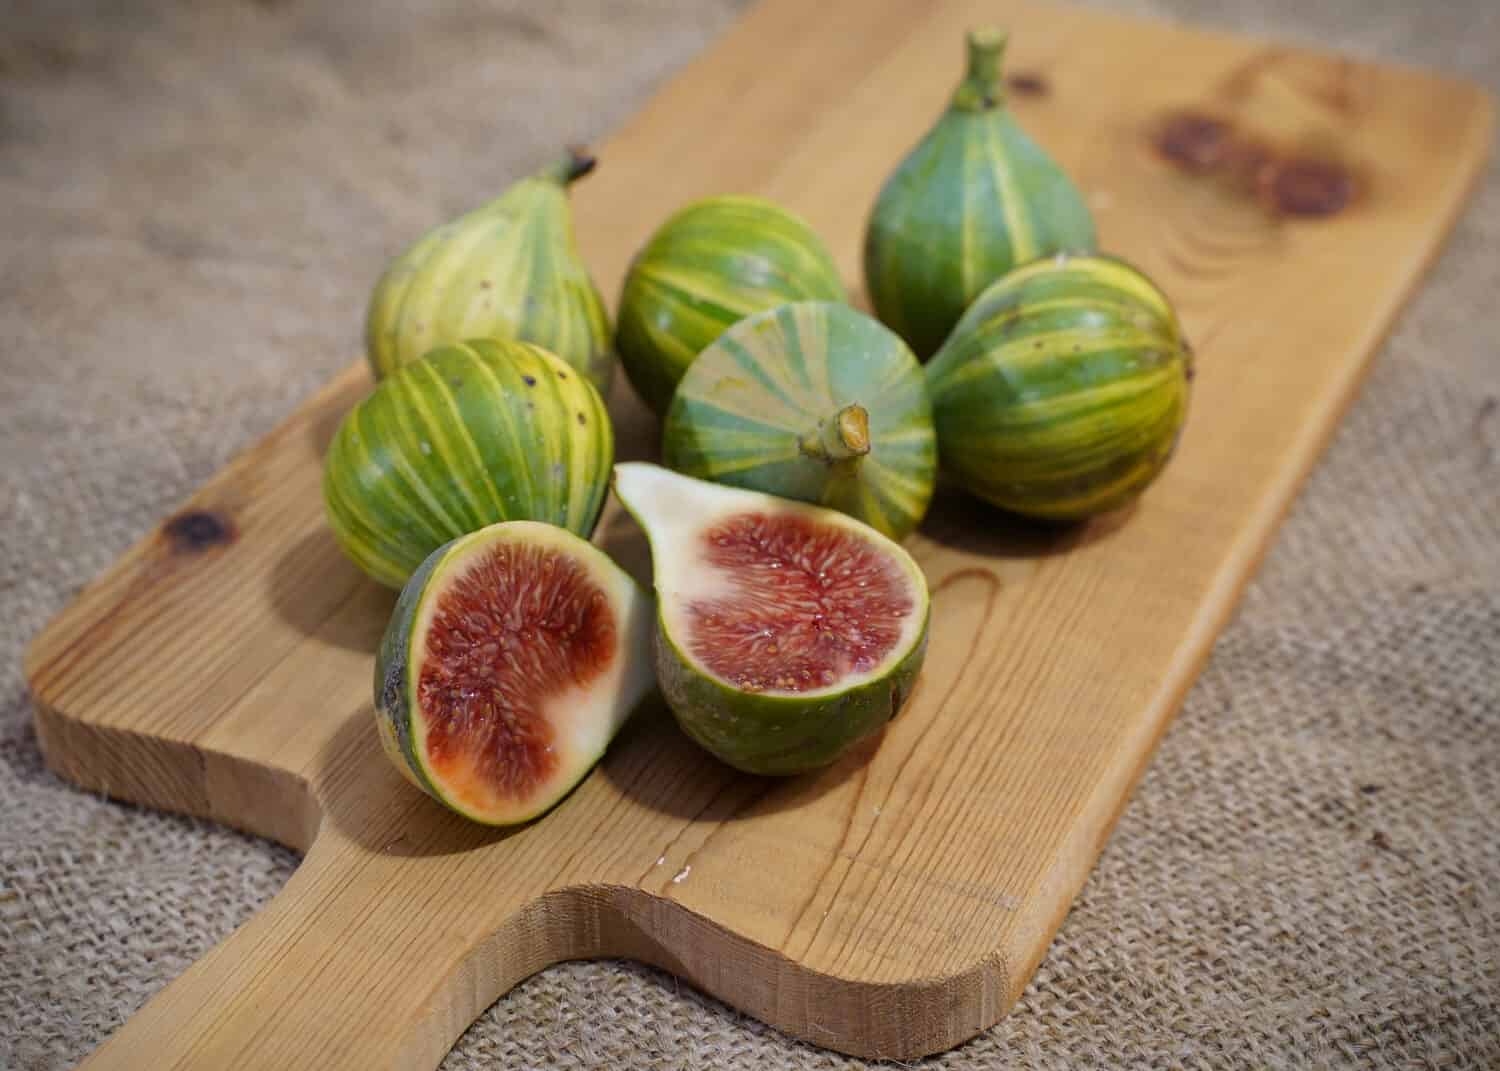 Ecological striped figs. Various striped tiger figs, also known as panache figs, and striped candy figs